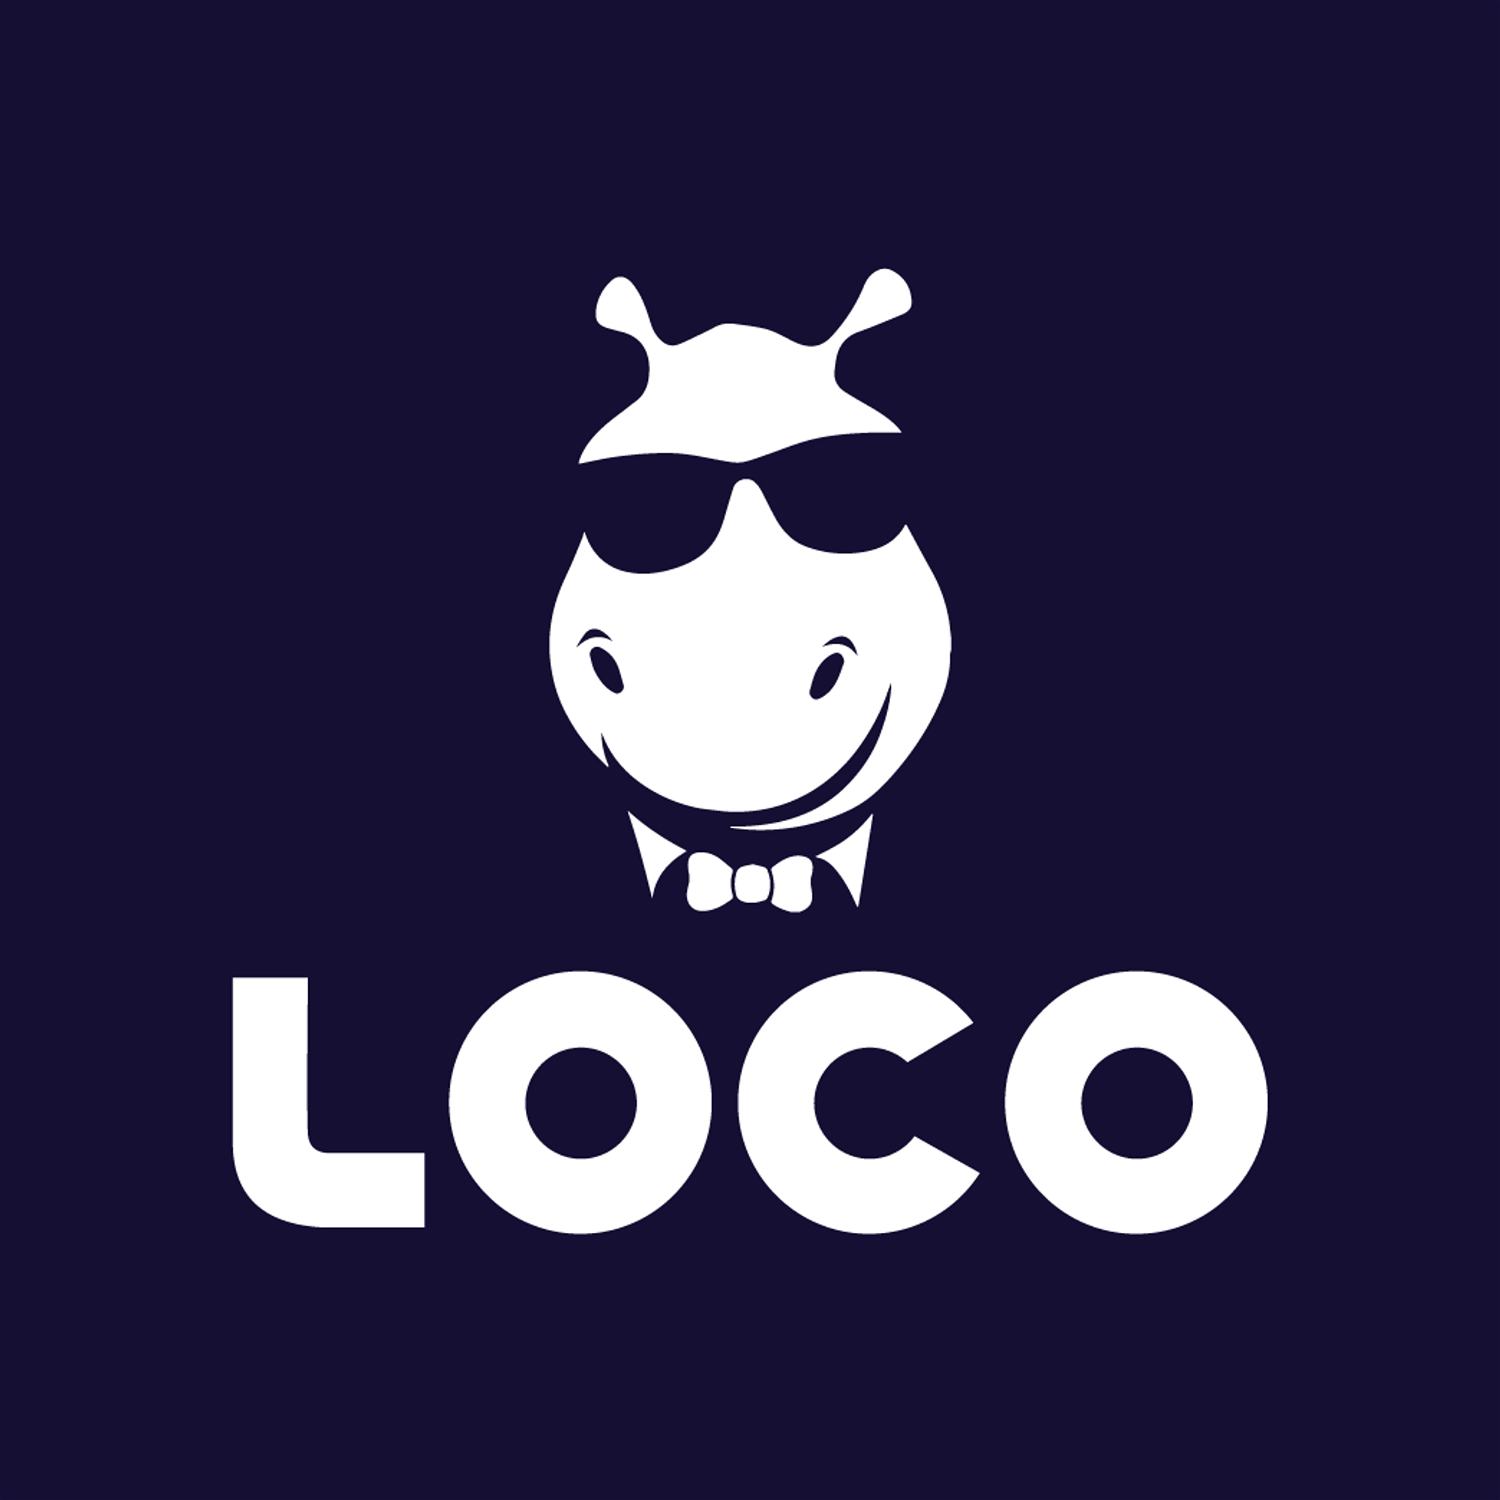 Loco is an esports gaming streaming platform in India